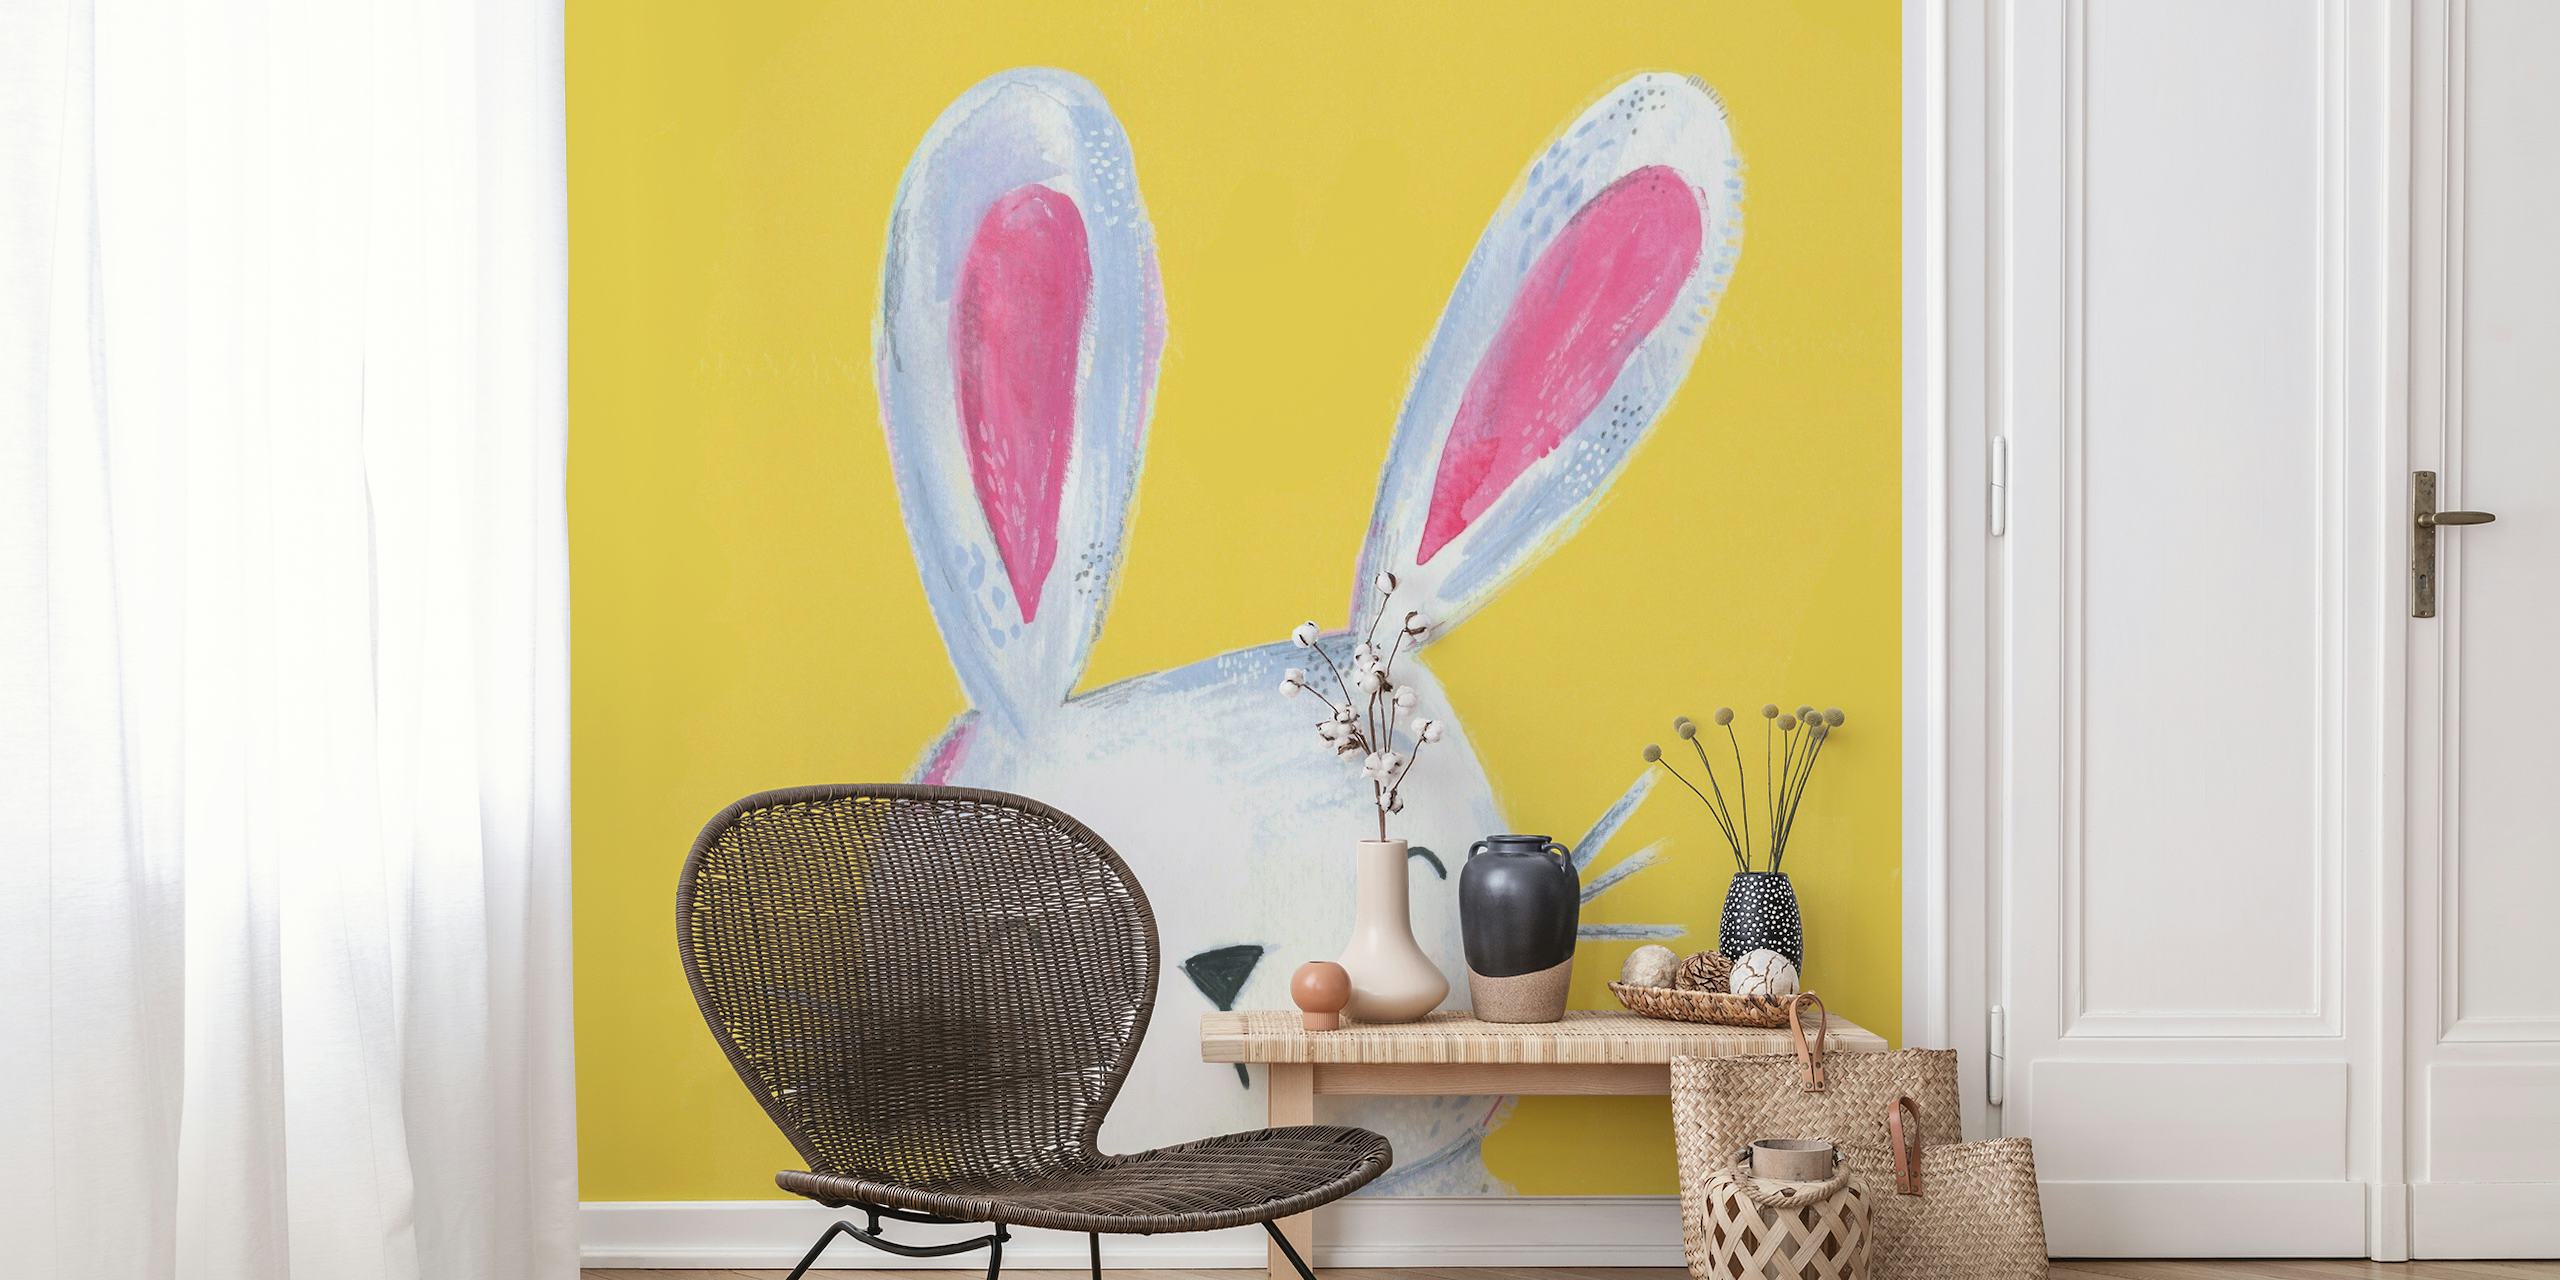 Painted bunny on yellow tapetit